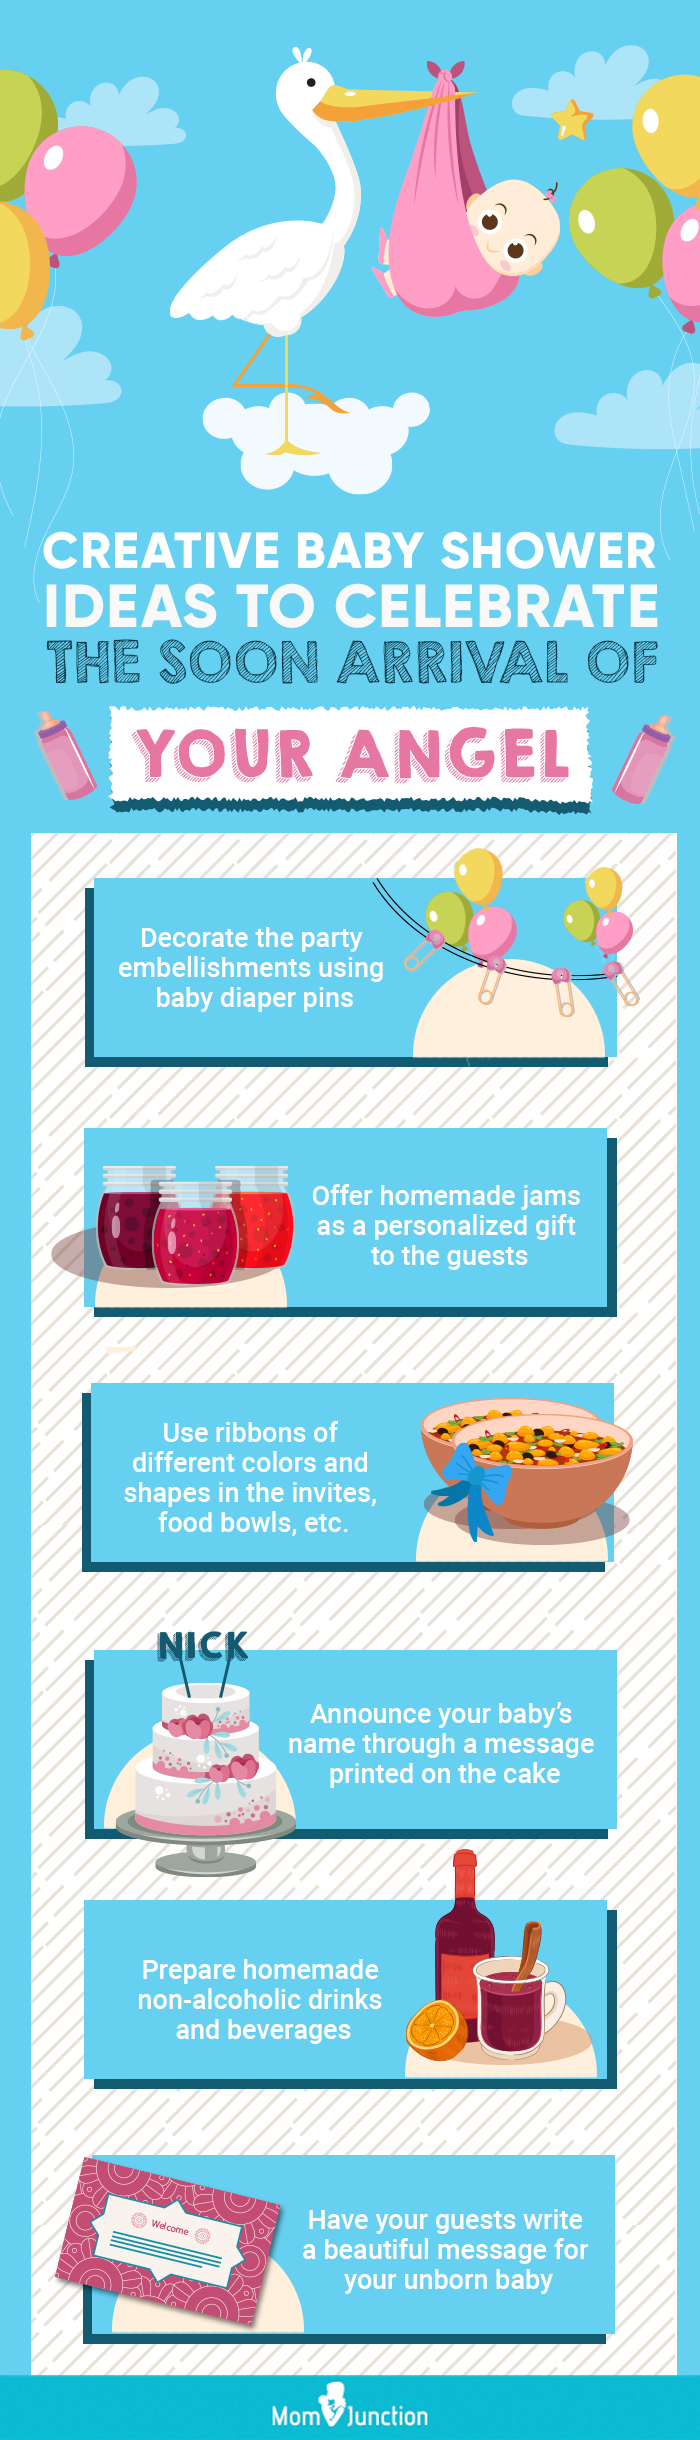 creative baby shower ideas to celebrate the soon arrival of your angel (infographic)